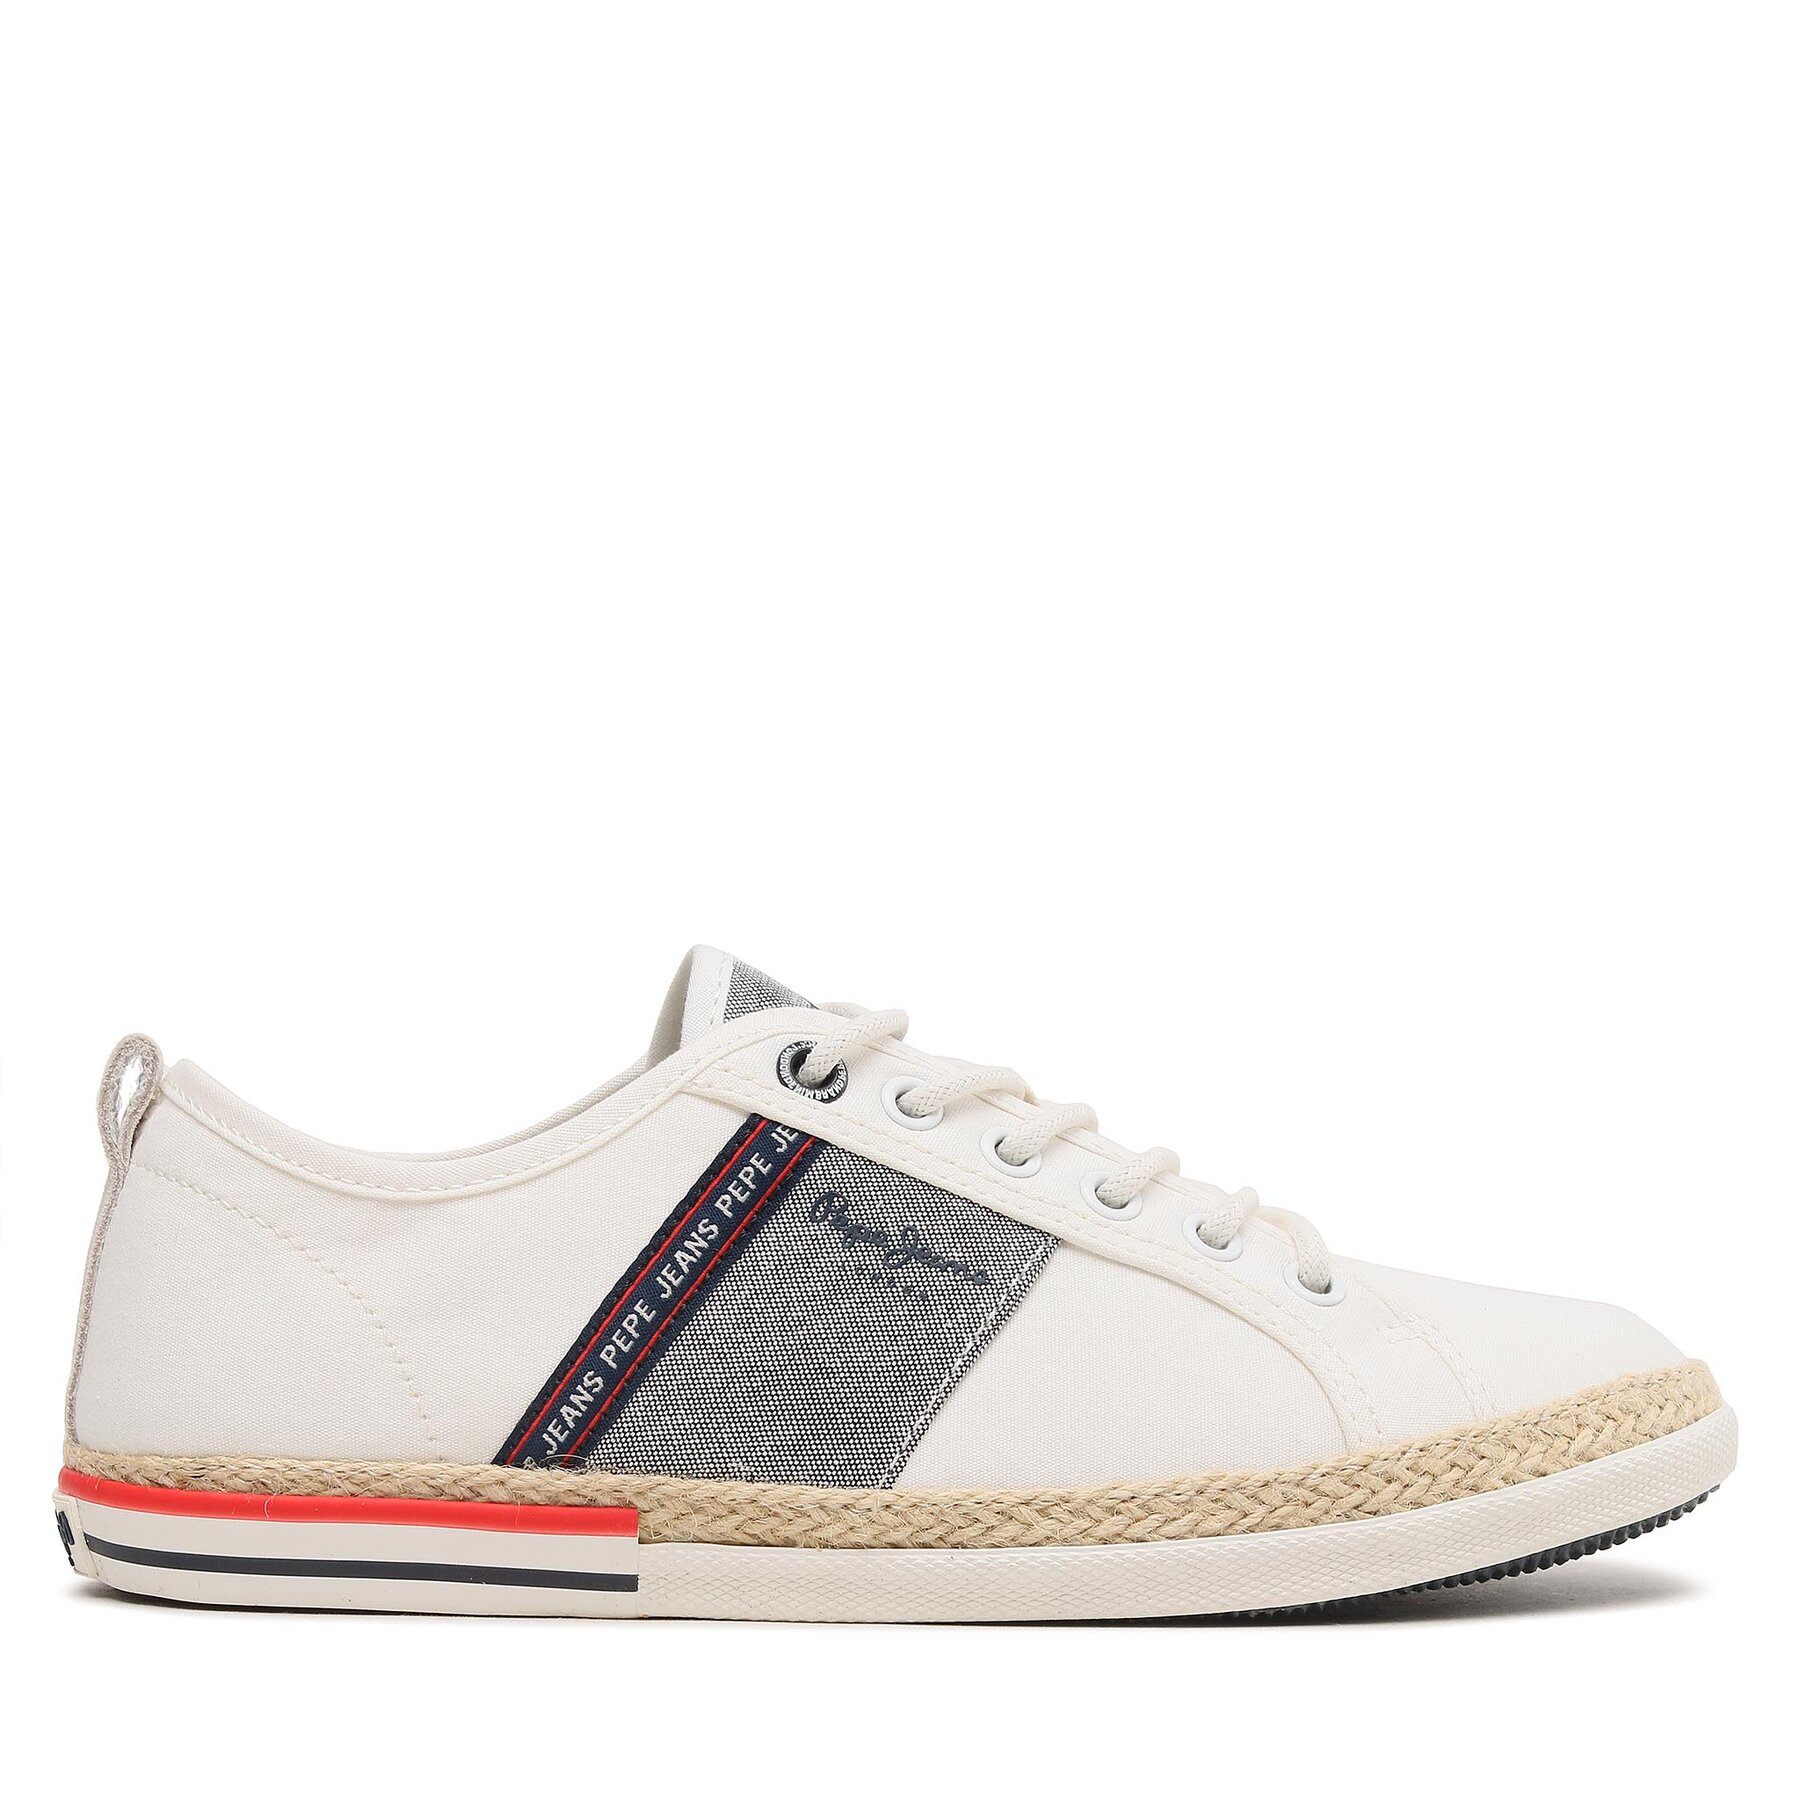 Sneakers aus Stoff Pepe Jeans Maoui Tape PMS30917 White 800 von Pepe Jeans